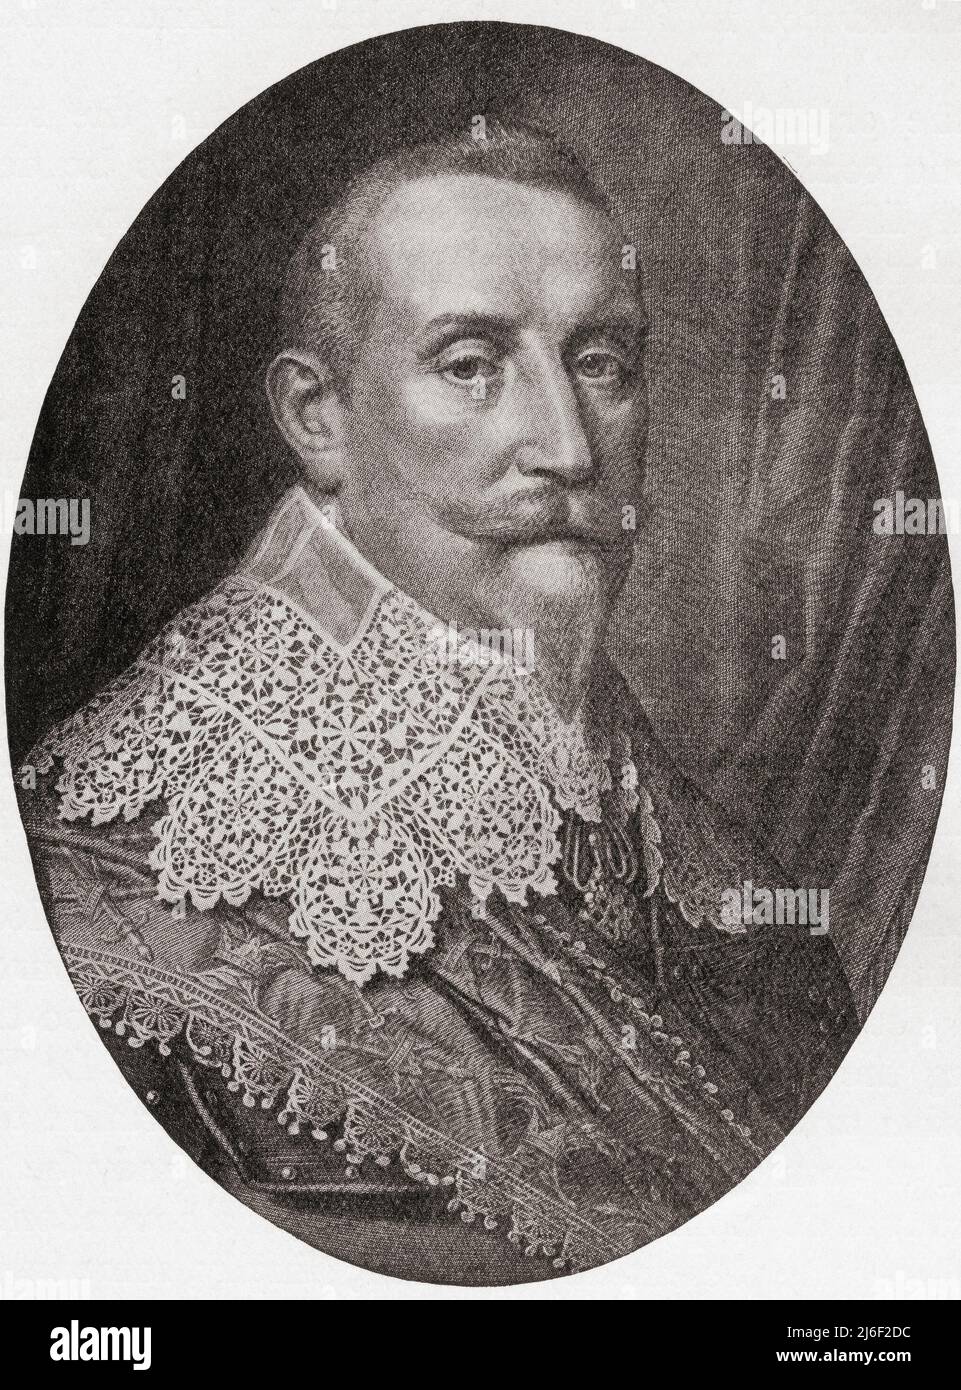 Gustavus Adolphus, 1594 – 1632, aka Gustav II Adolf or Gustav II Adolph.  King of Sweden. From Modes and Manners, published 1935. Stock Photo